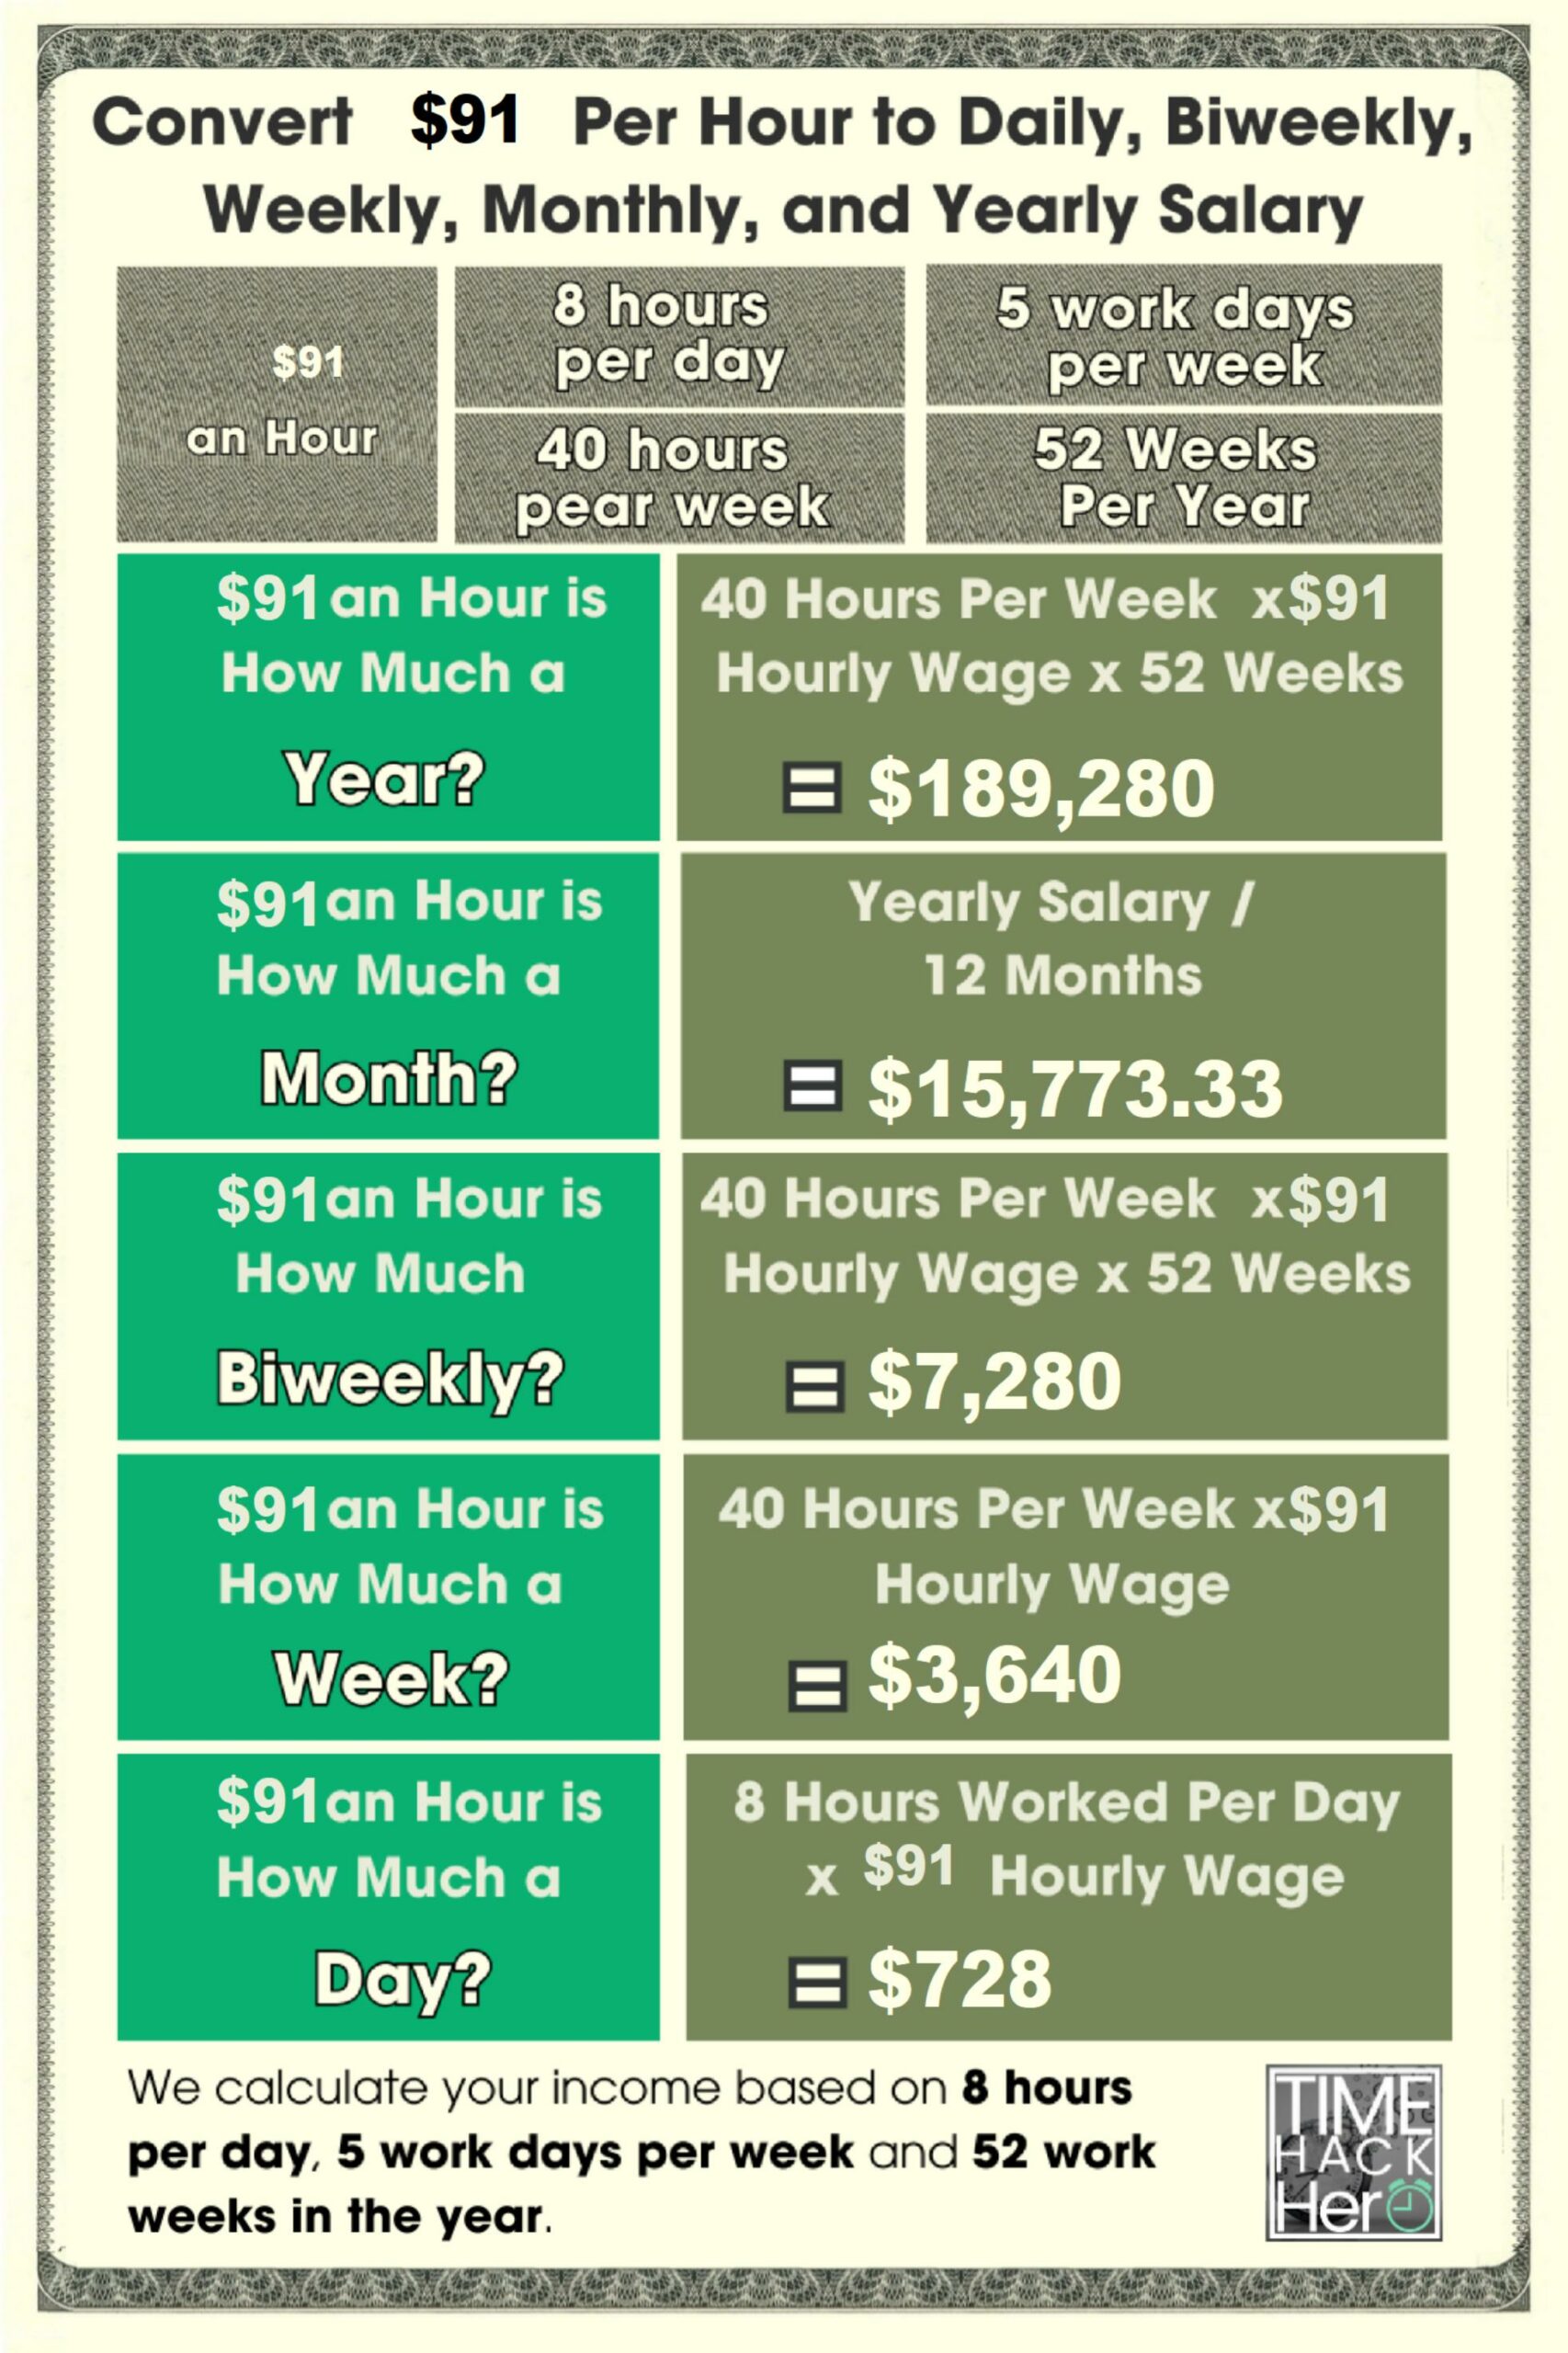 Convert $91 Per Hour to Weekly, Monthly, and Yearly Salary